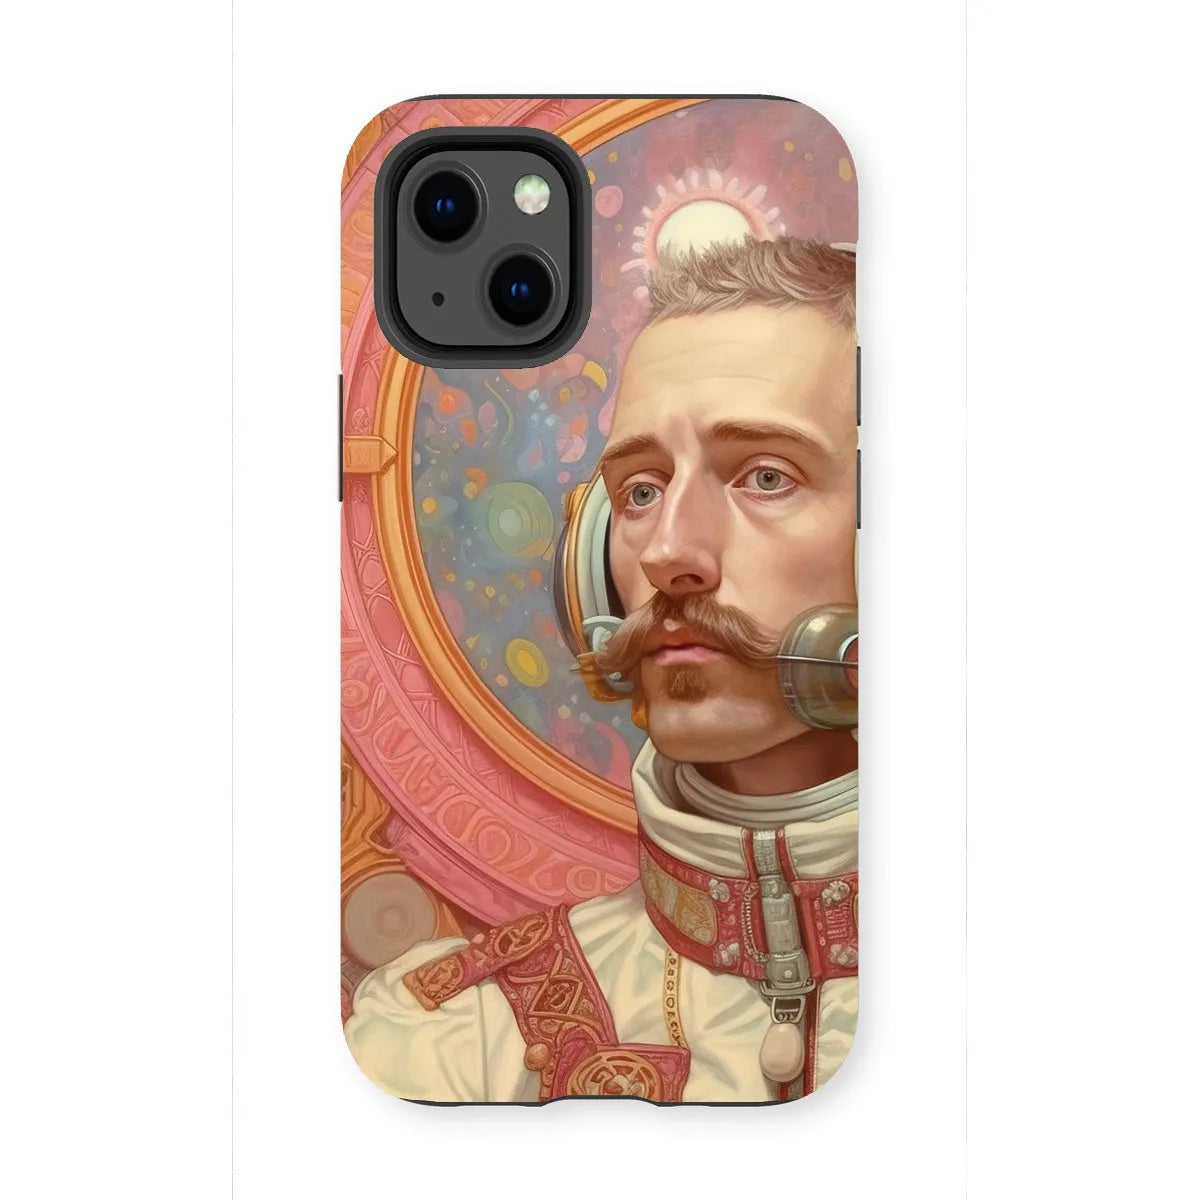 Axel The Gay Astronaut - Gay Aesthetic Art Phone Case - Iphone 13 Mini / Matte - Mobile Phone Cases - Aesthetic Art